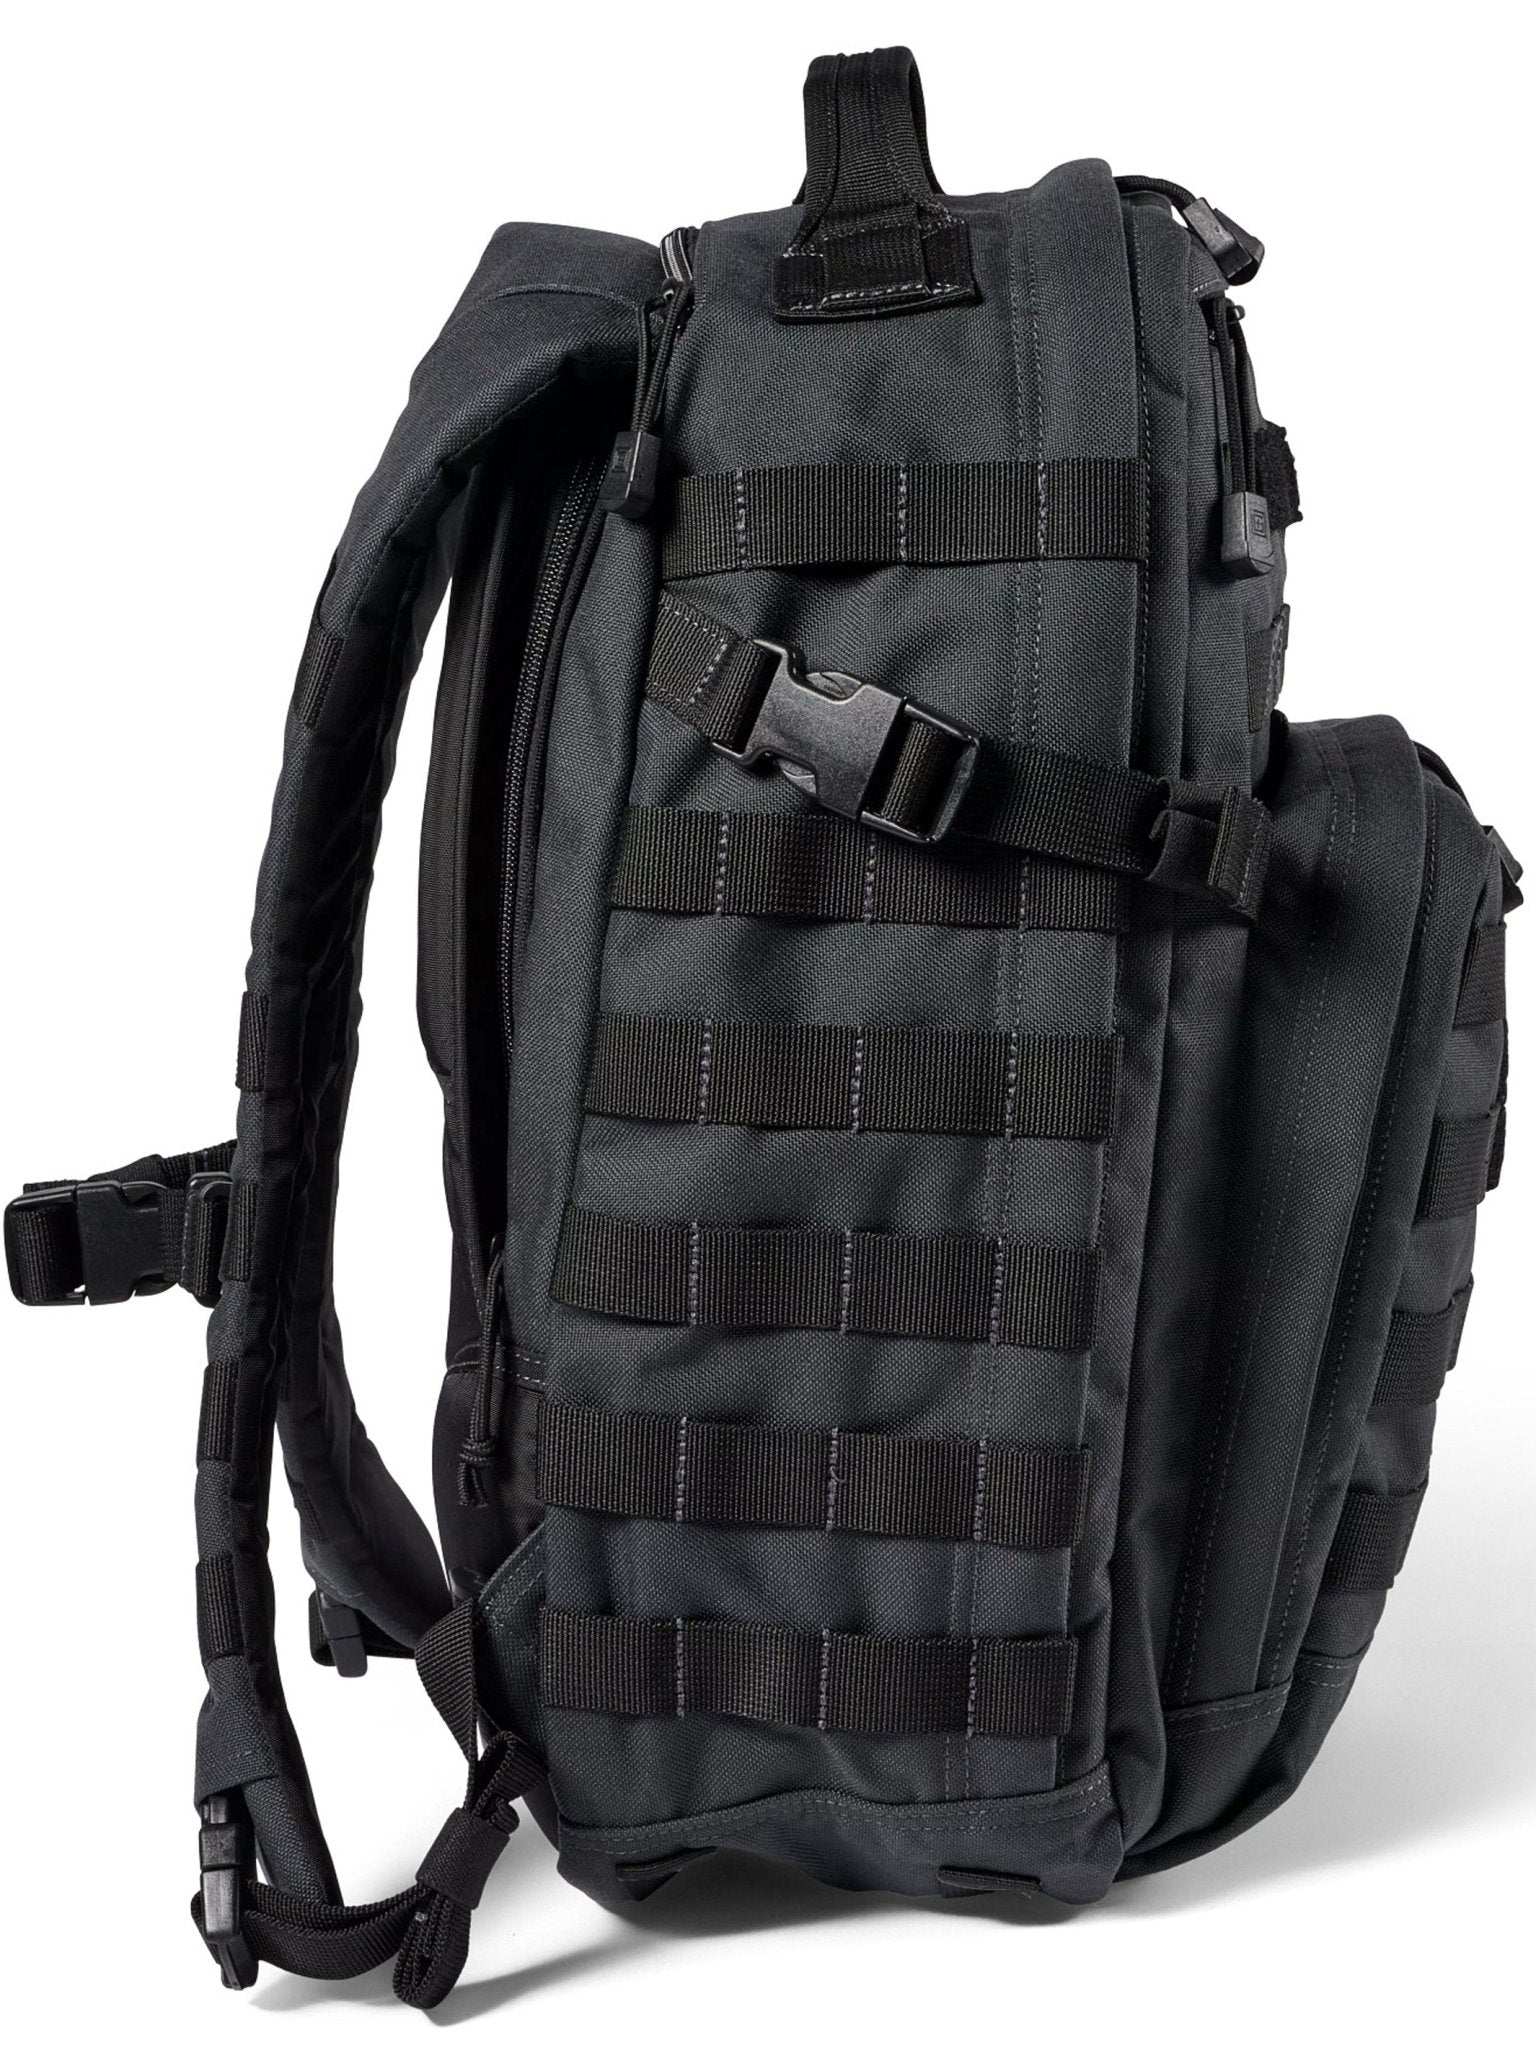 4elementsclothing5.11 Tactical5.11 Tactical - 5.11 Tactical Rush 12 2.0 Backpack with Laptop compartment - Style 56561Bag56561-019